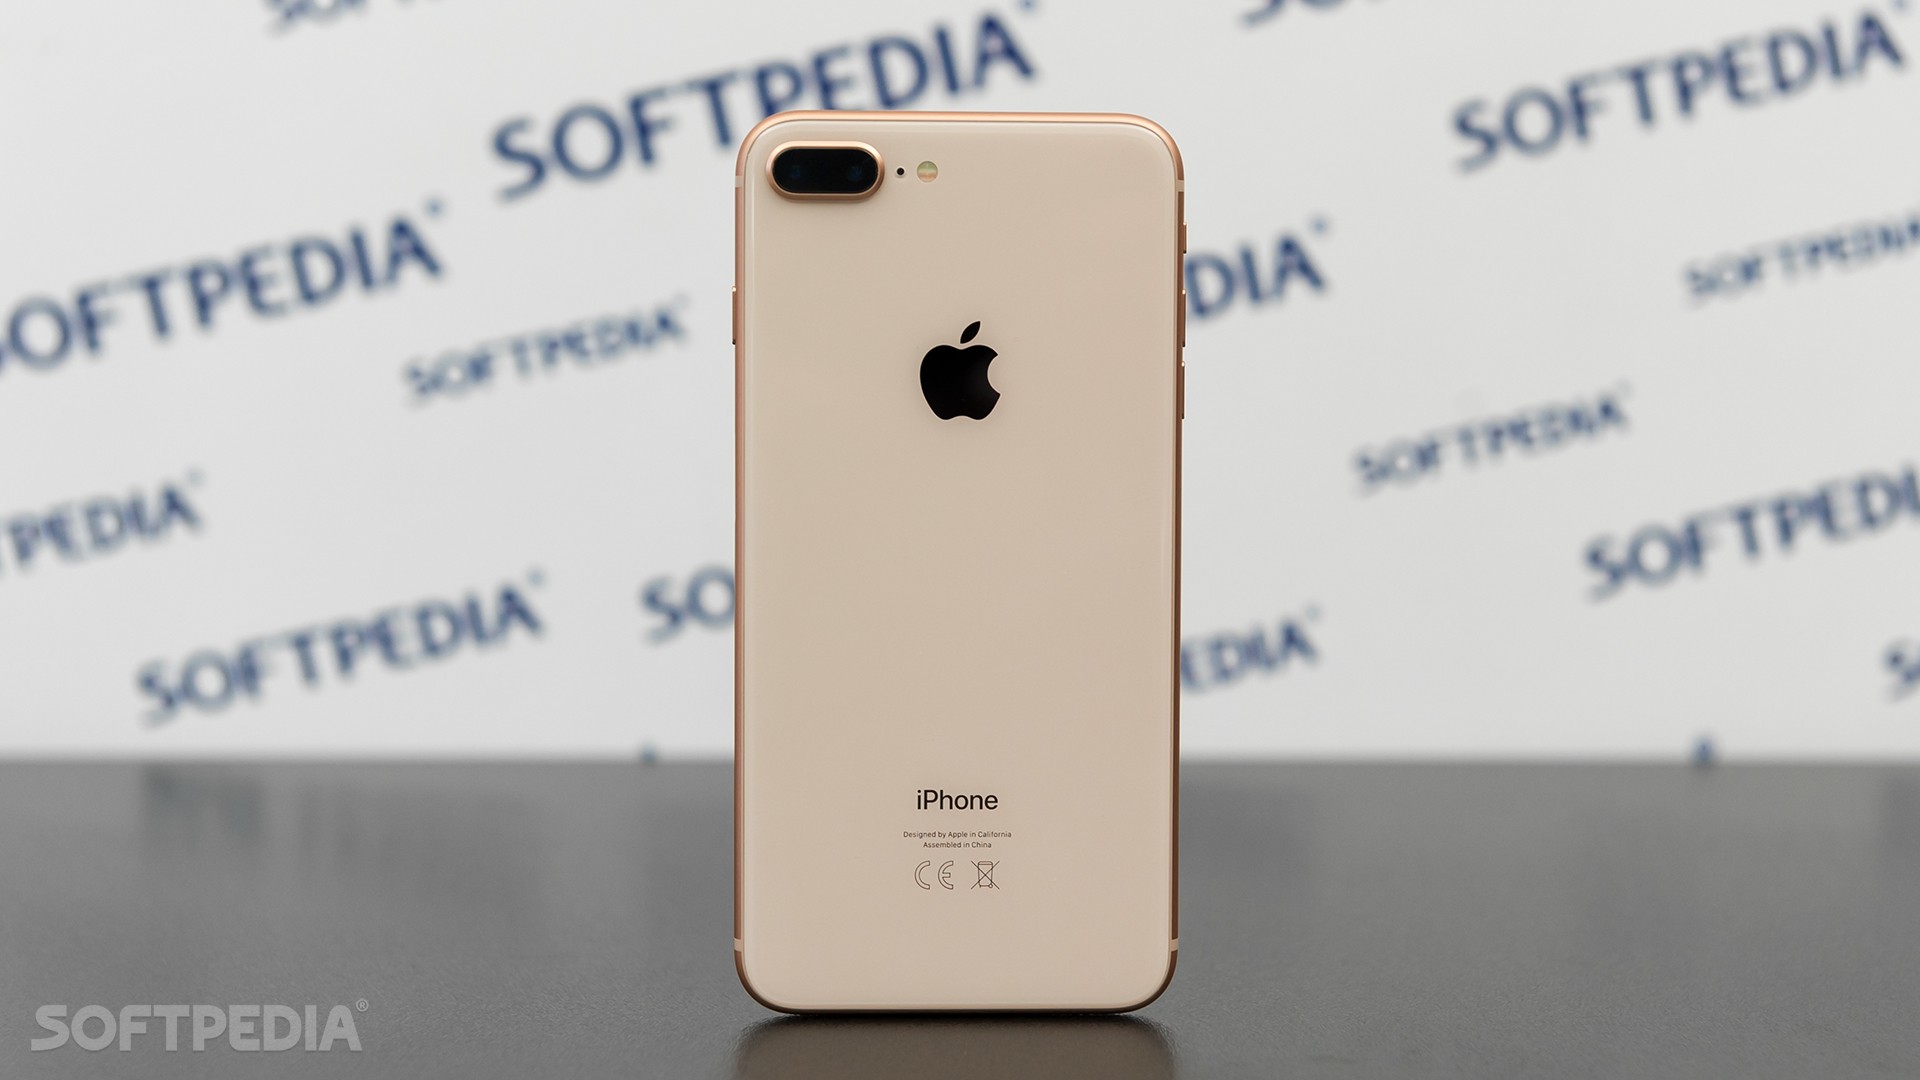 Iphone xs max will be the heaviest iphone ever released by apple 522633 2